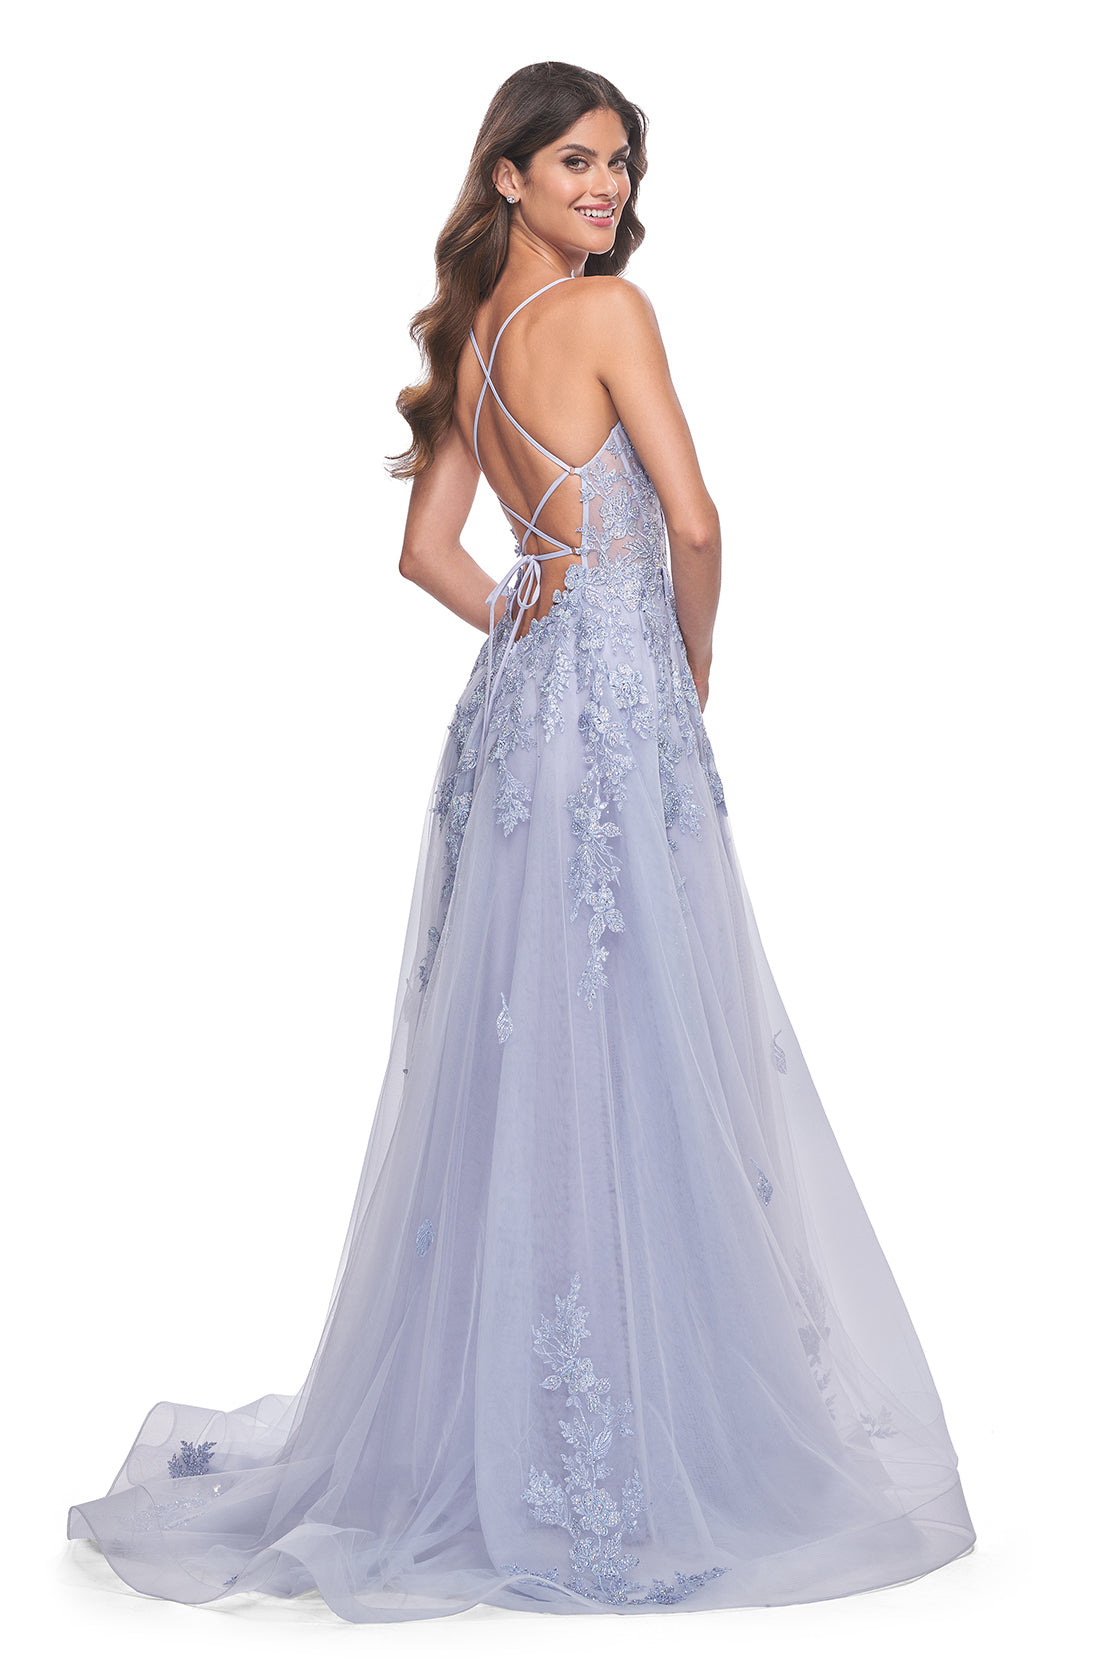 La Femme 32062 A-Line Lace Applique Prom Gown - An enchanting A-line gown featuring a deep v-neck, high slit, lace applique embellished bodice, lace detailed hem, and a charming tie-up back. Perfect for prom or a quinceañera. Model is wearing Light Periwinkle.